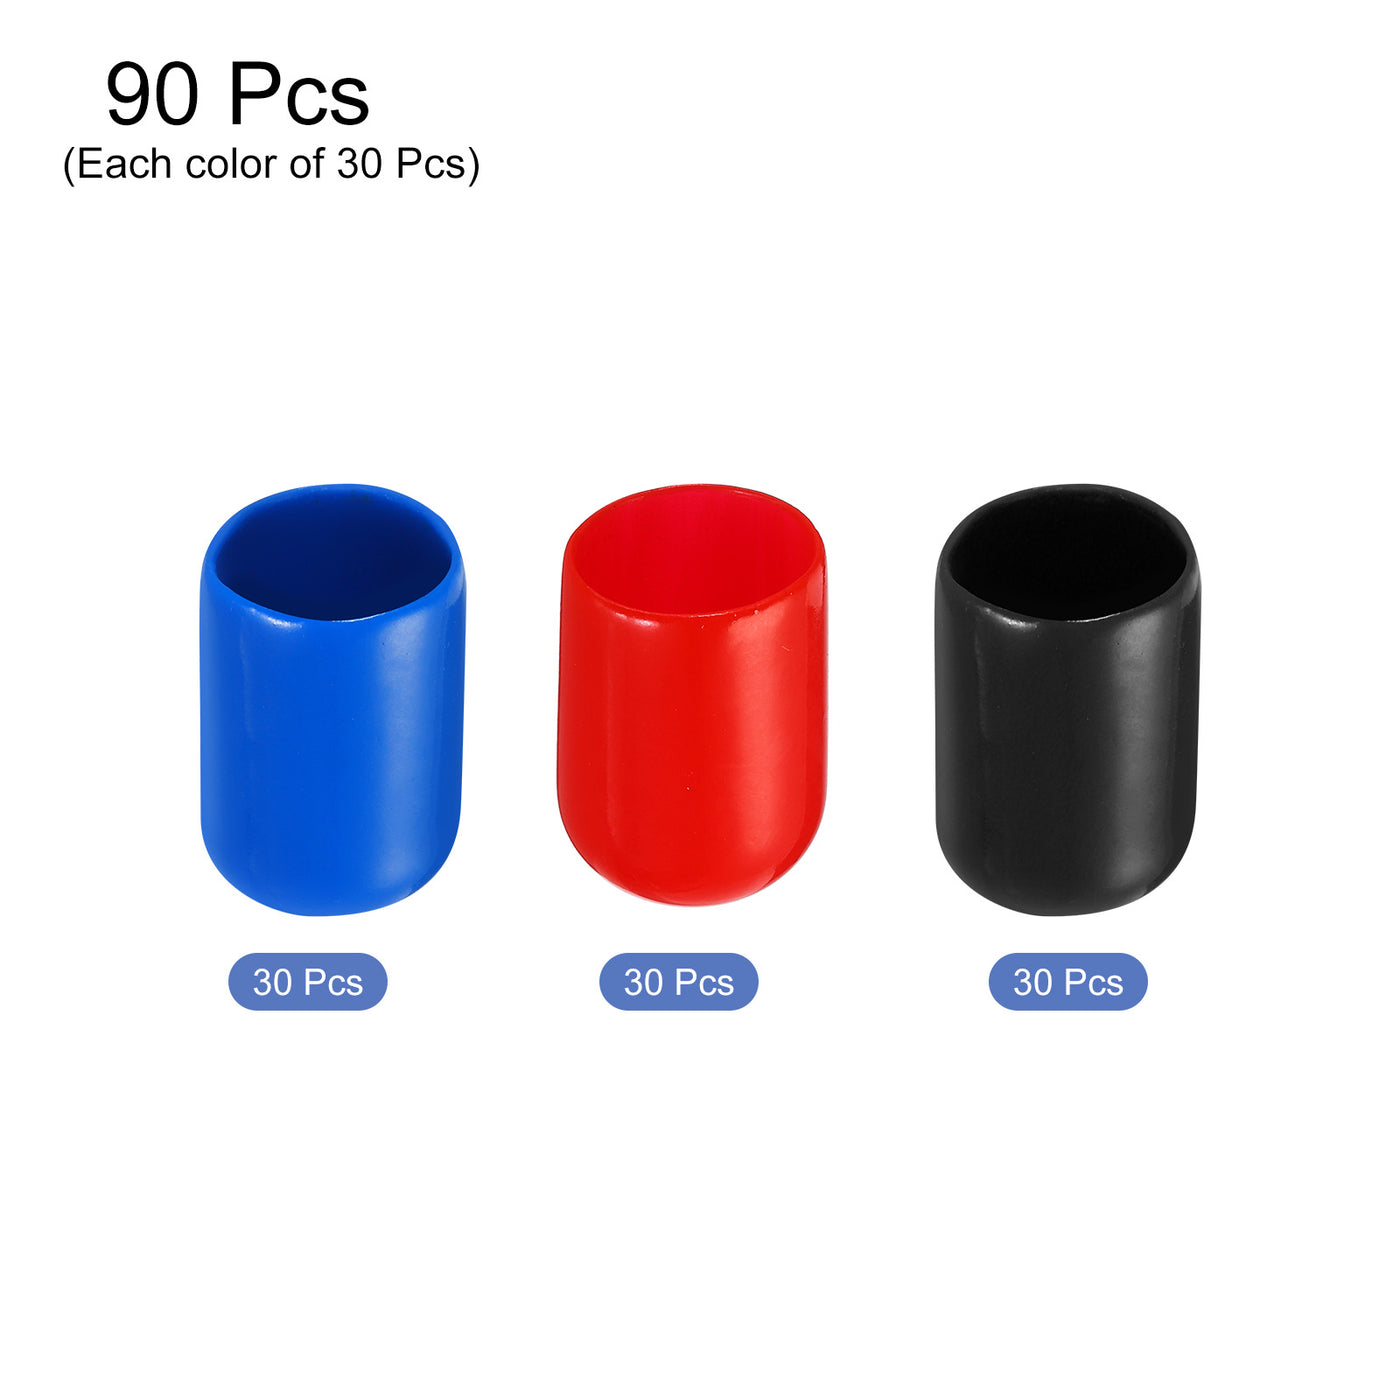 uxcell Uxcell 90pcs Rubber End Caps 14mm ID Vinyl PVC Round Tube Bolt Cap Cover Screw Thread Protectors, Black Red Blue